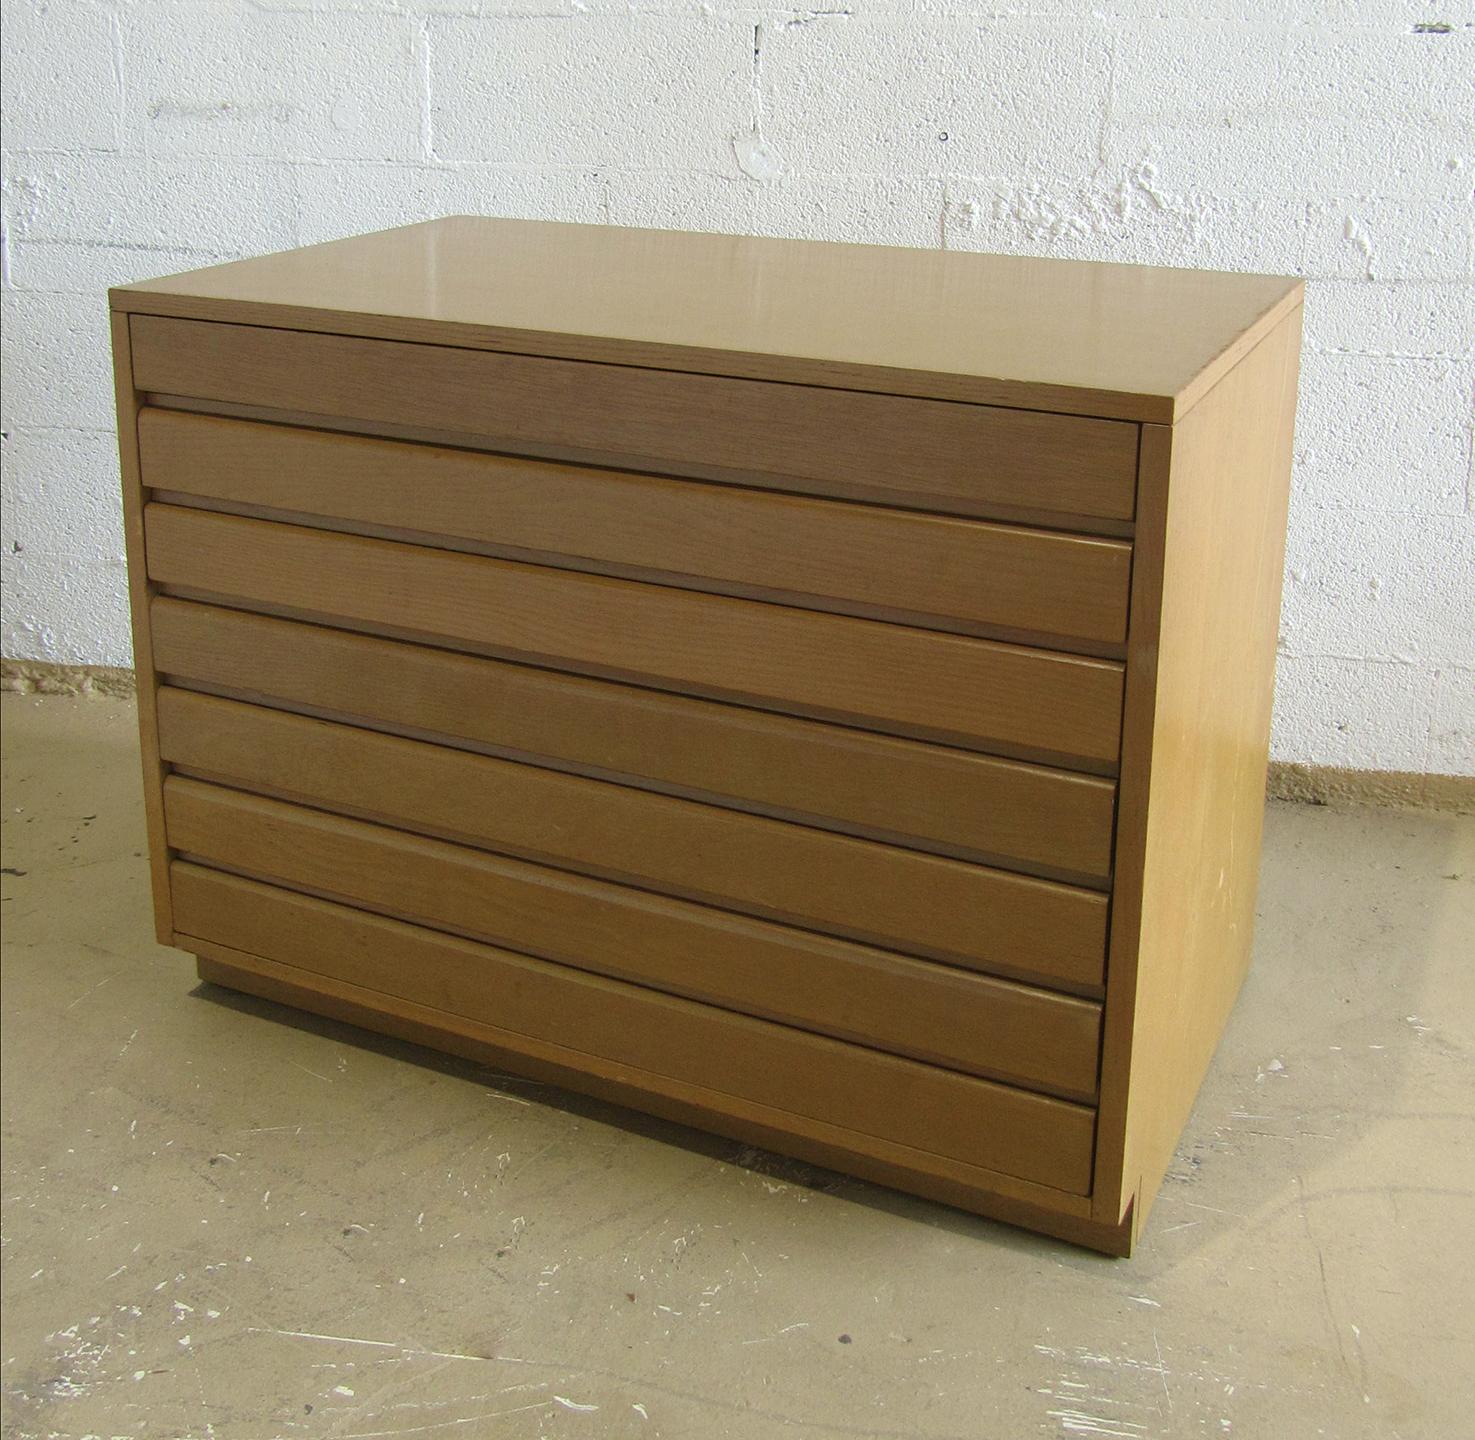 Pair of American Modern Chest of Drawers/ Nightstands, Sligh Furniture In Good Condition For Sale In Hollywood, FL